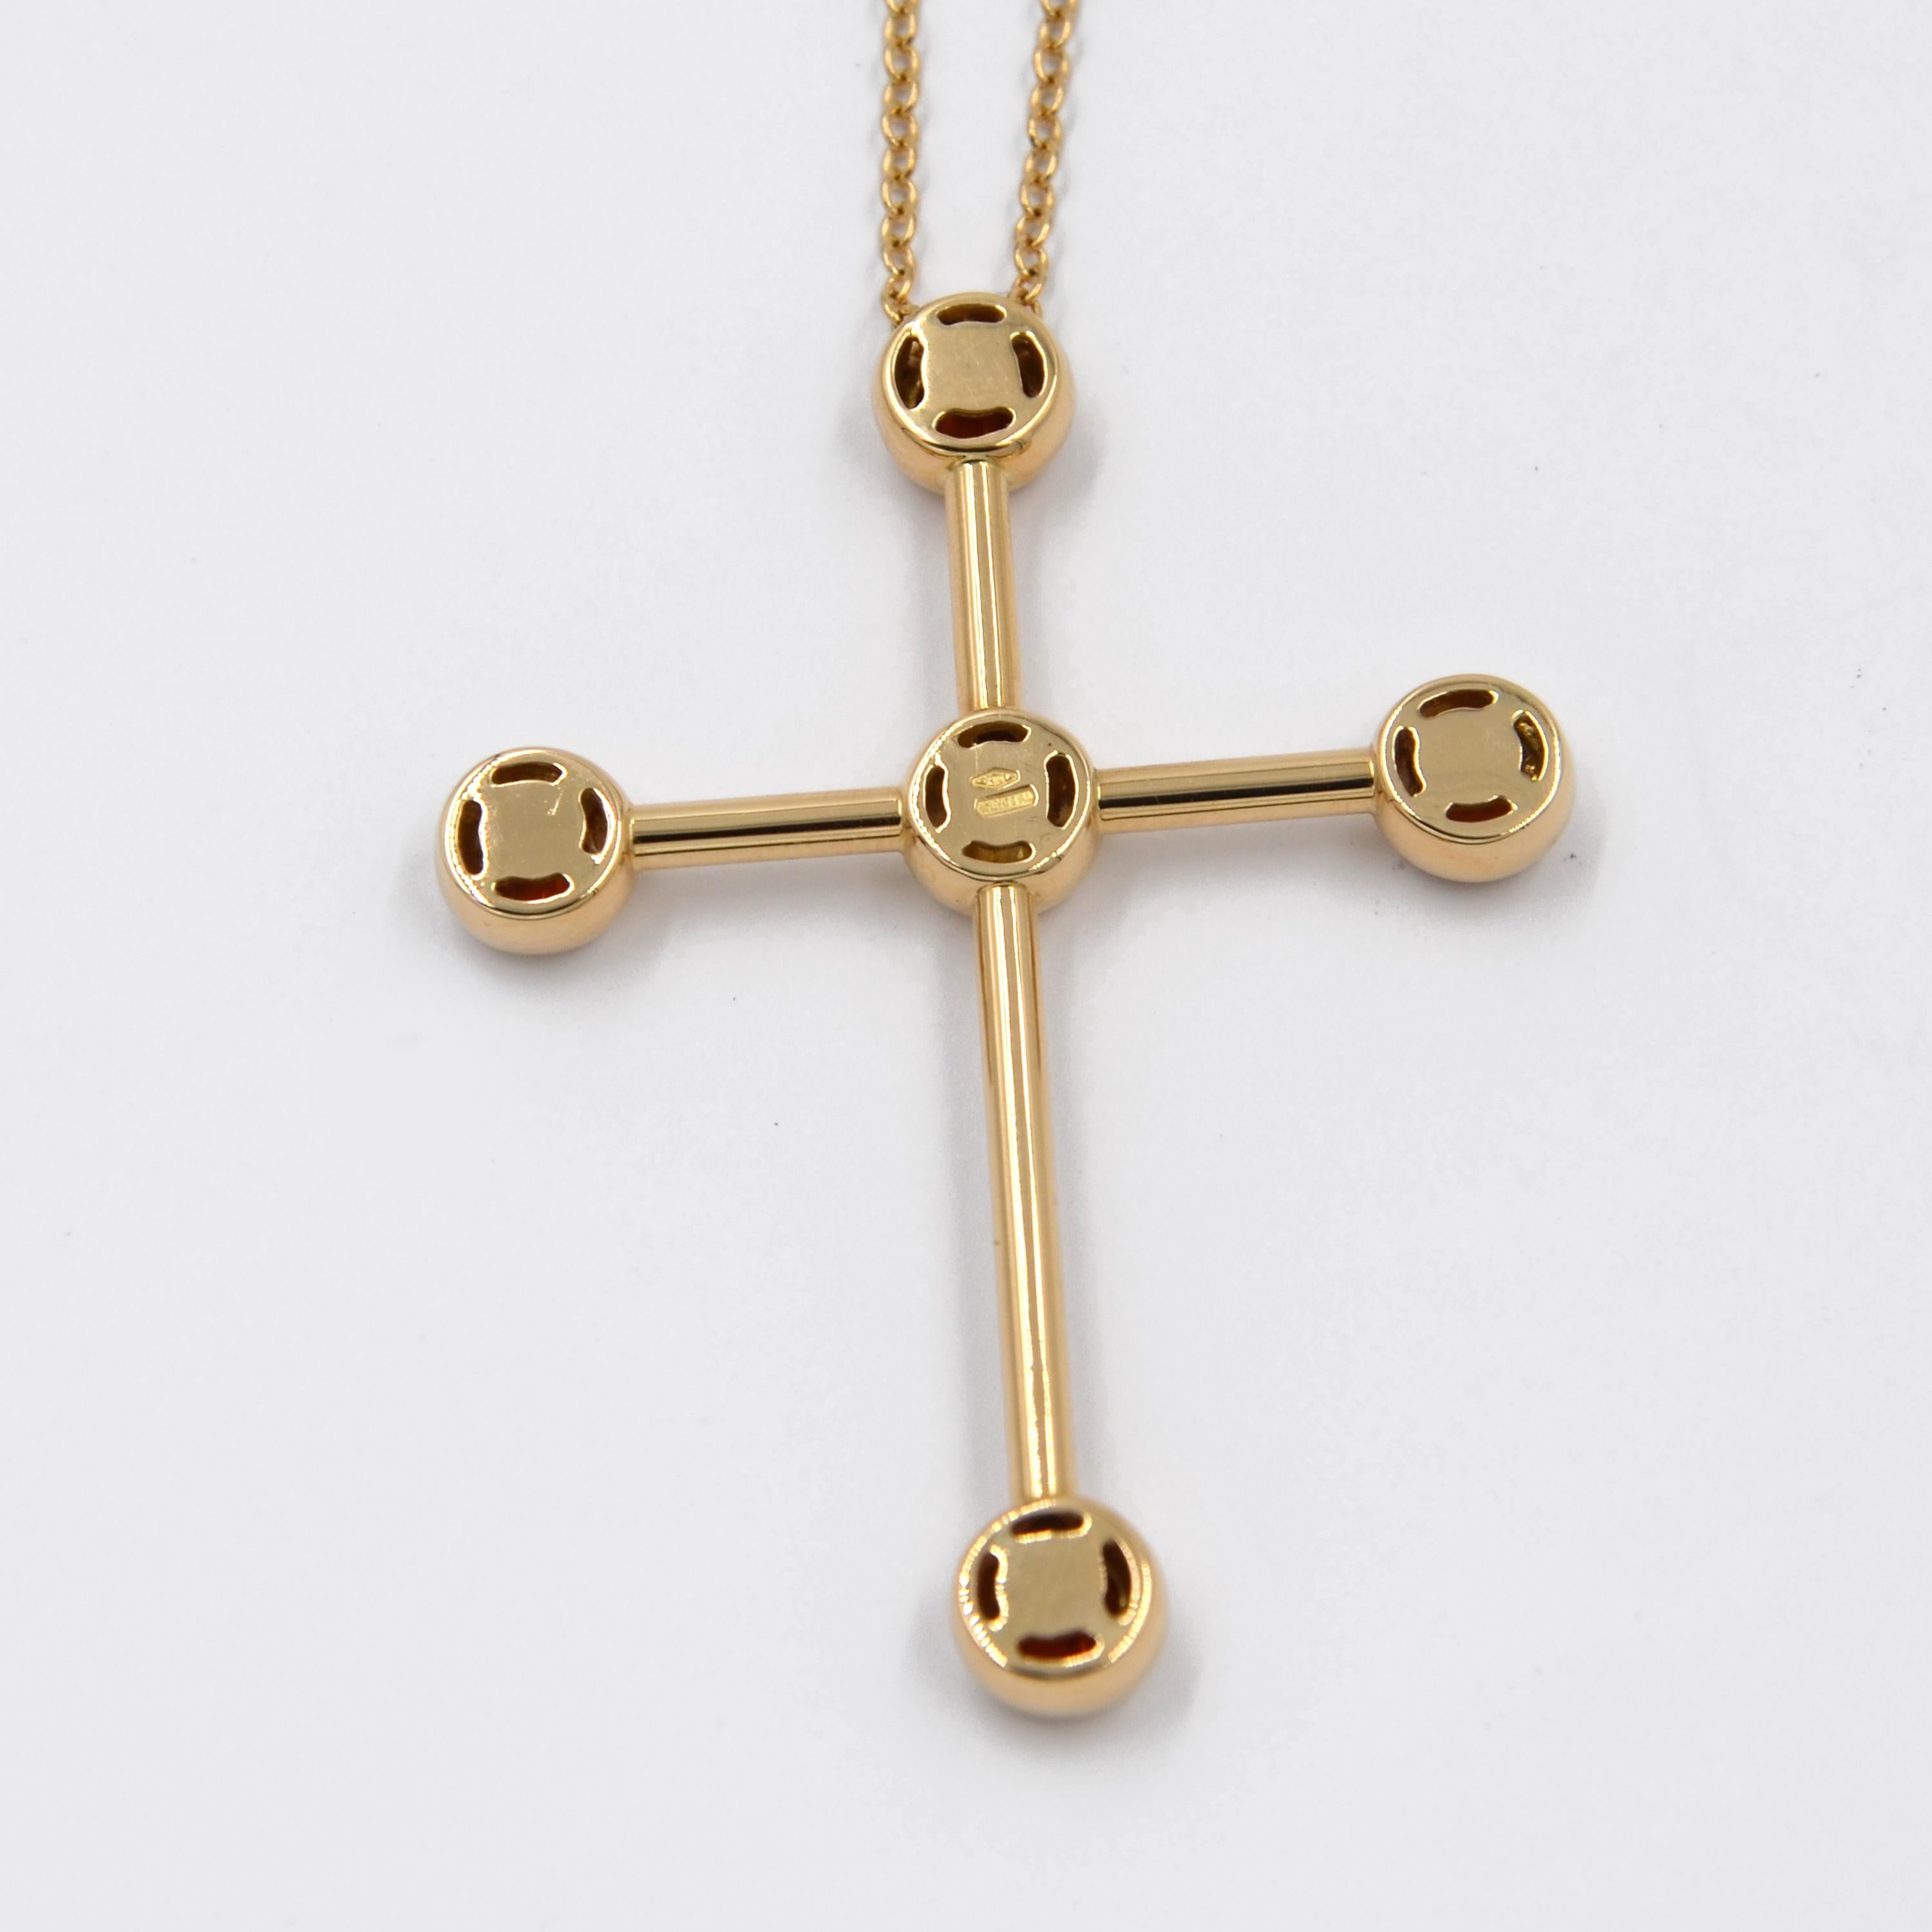 18Kt Yellow Gold Yellow Quartz and Madera Citrine Garavelli Cross Long Necklace
Cross size  MM 55 X 45
Chain cm 65 with loop at 50 
GOLD gr : 14,44
Citrine and Quartz total weight. ct : 2,36